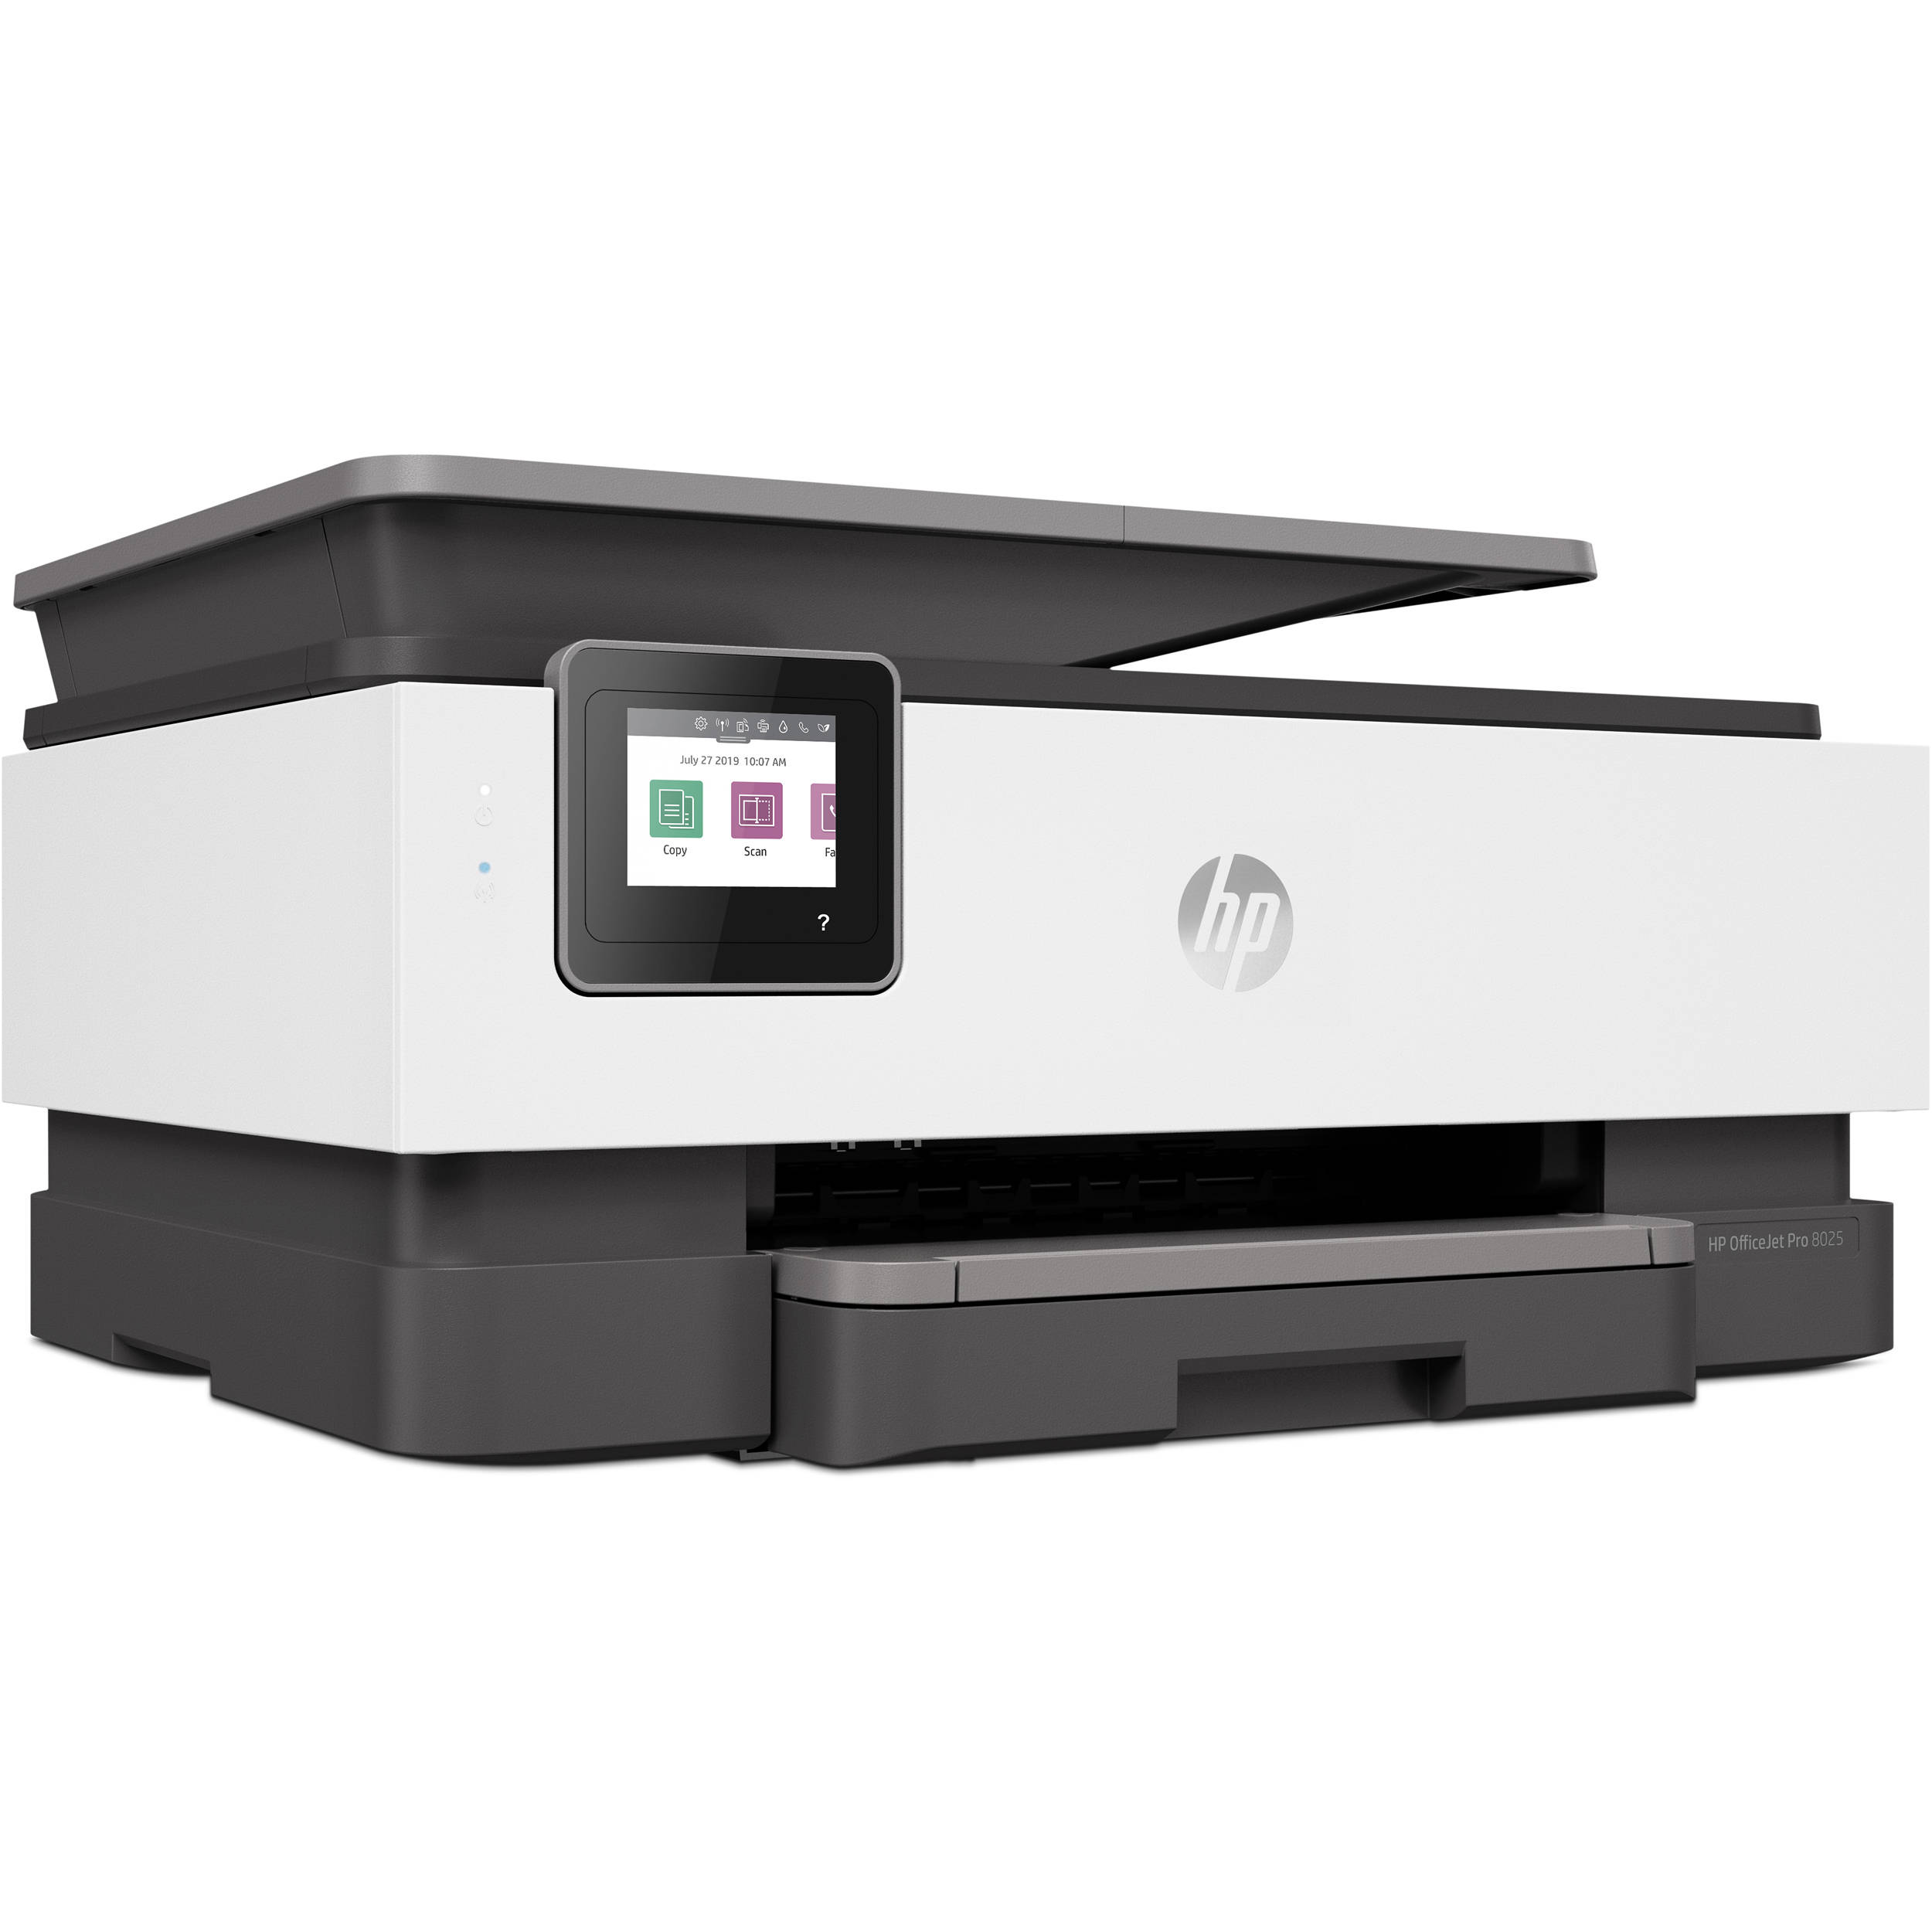 HP Pro 8025 All-in-One Printer